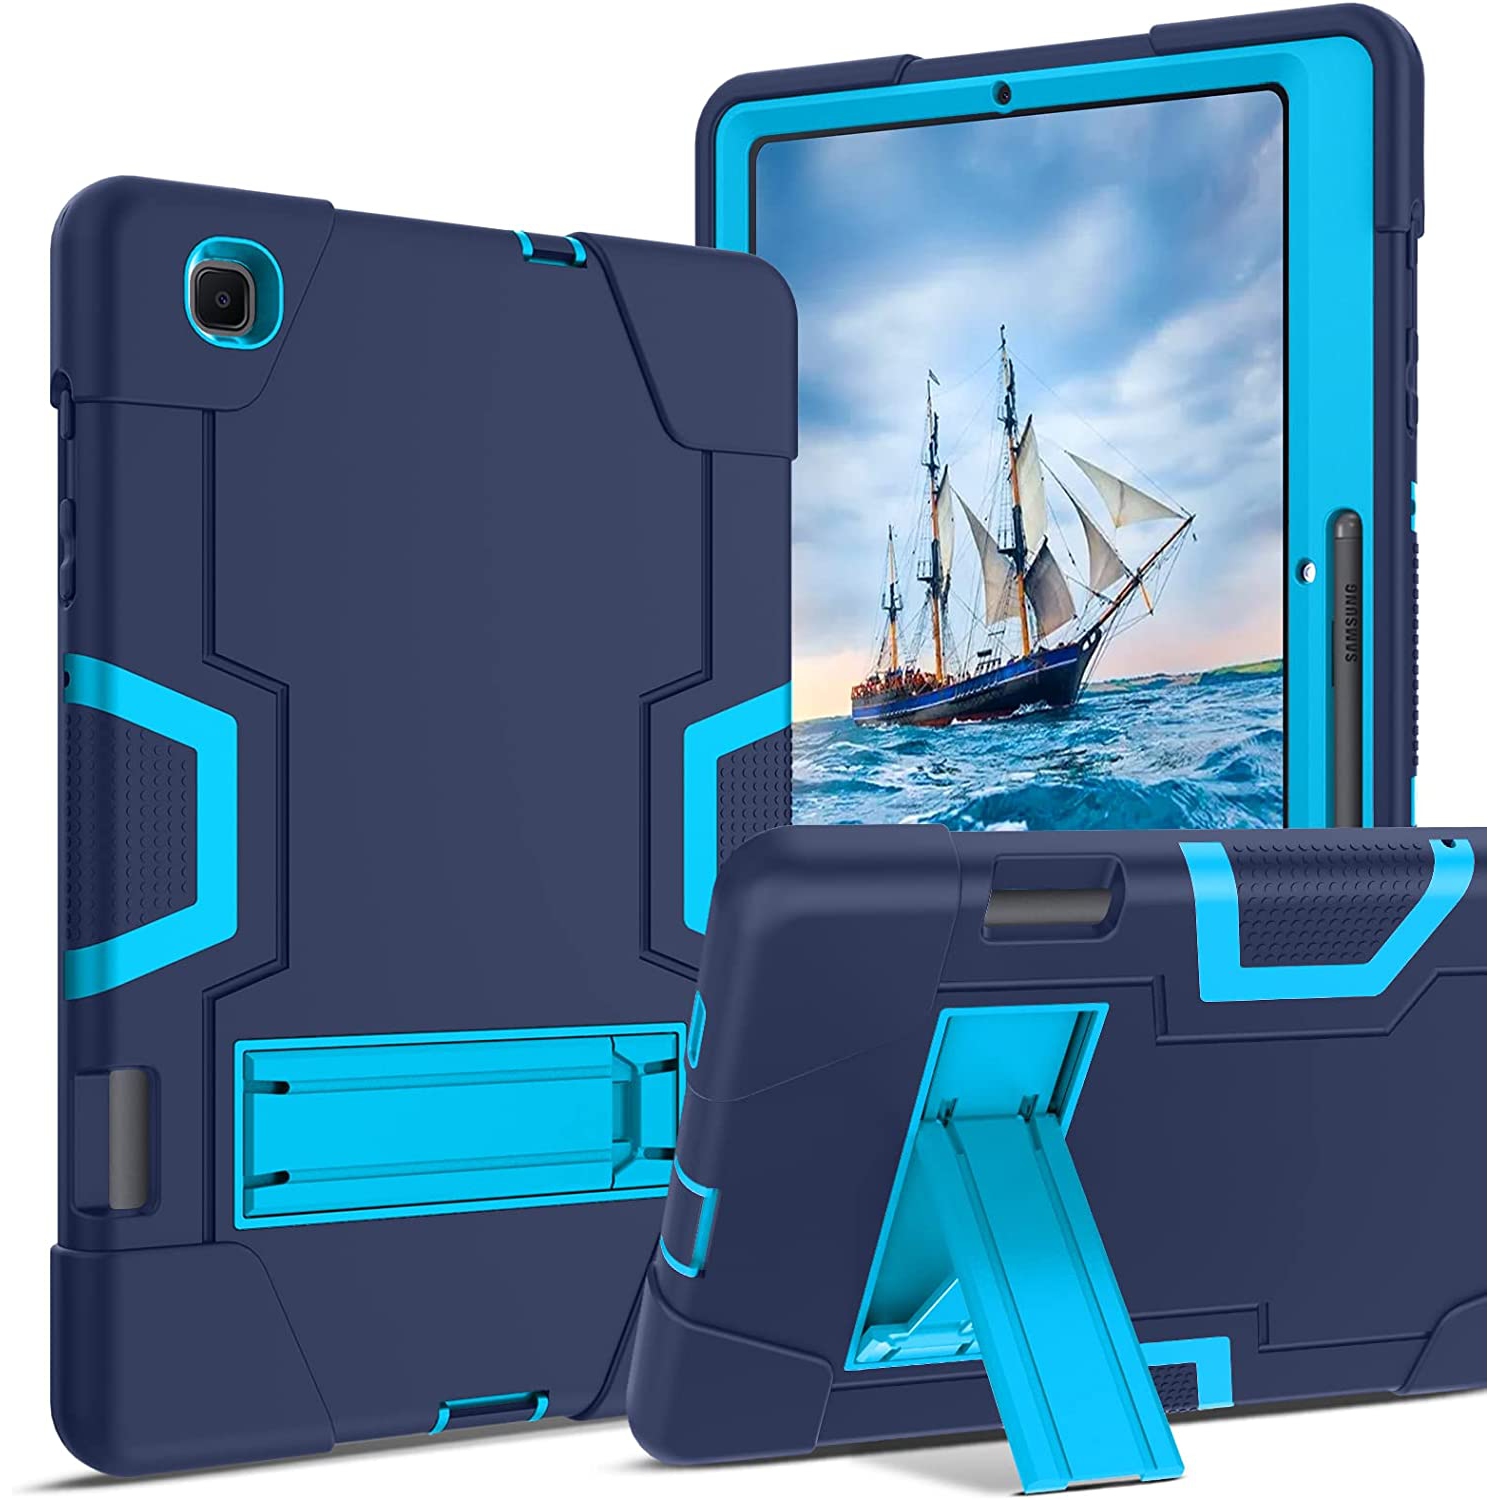 Samsung Galaxy Tab S6 Lite Case Y with Pencil Holder 3 in 1 Rubber Shockproof Heavy Duty Protective Kickstand Tablet Covers for Samsung Galaxy Tab S6 Lite 10.4 inch 2020 (P610/P615